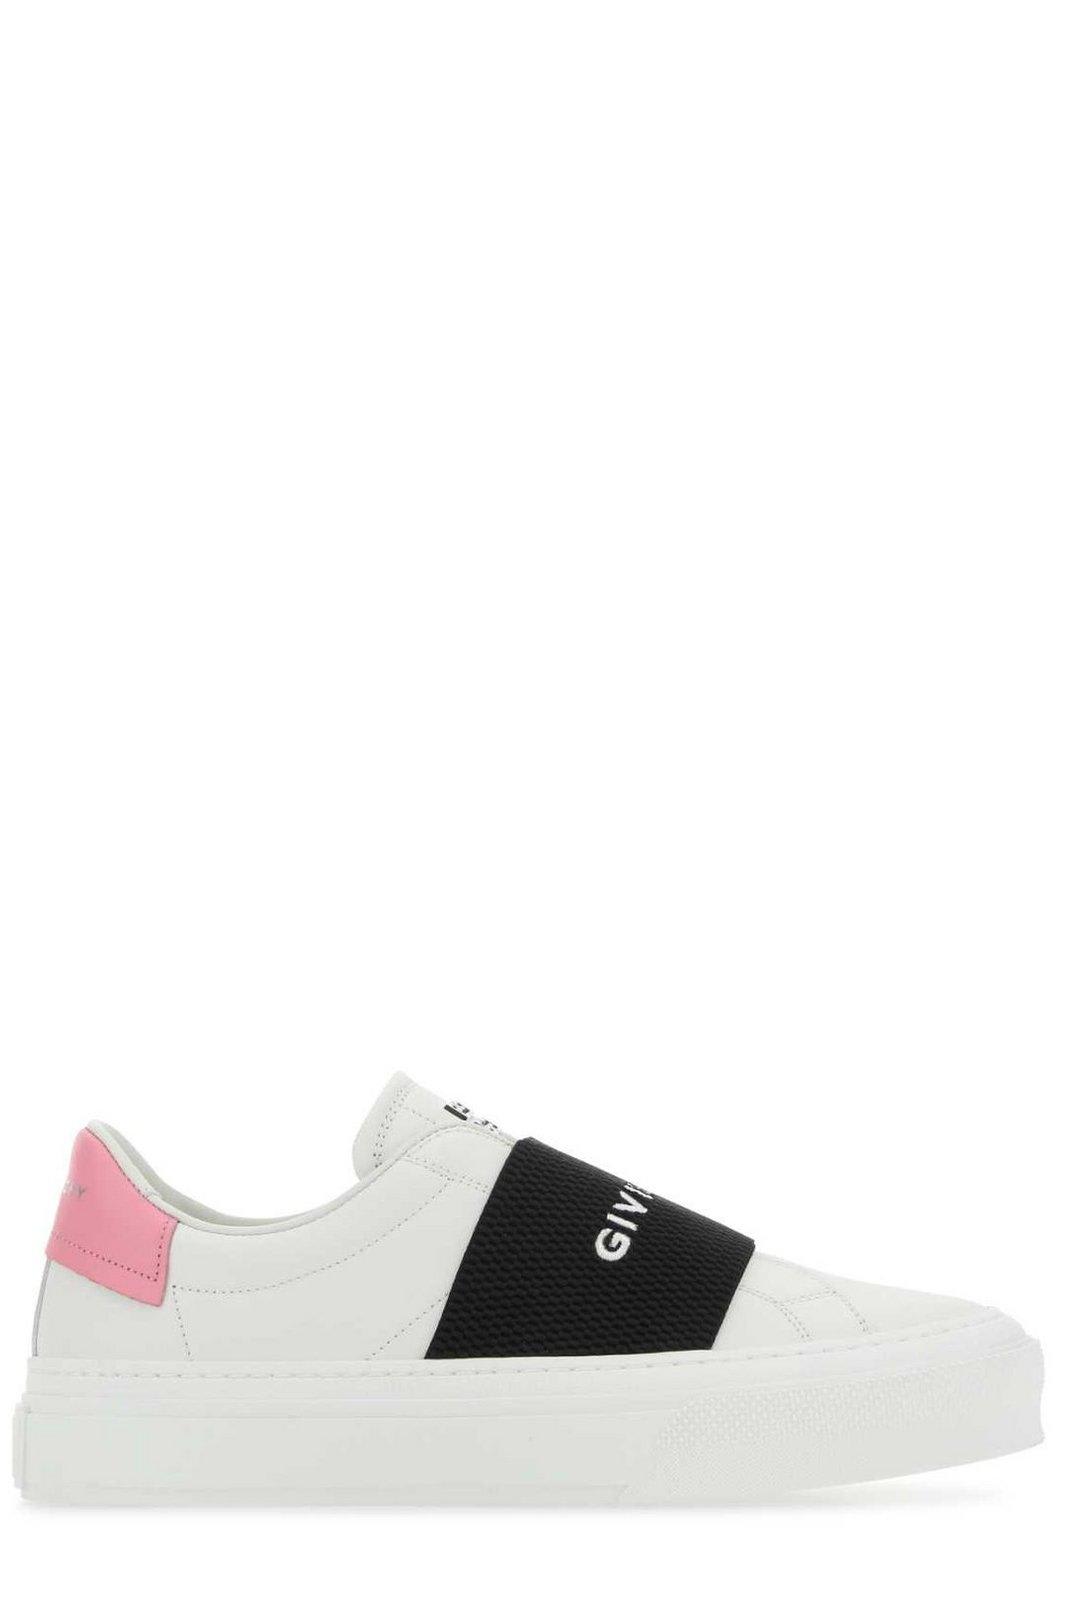 GIVENCHY CITY COURT SLIP-ON SNEAKERS